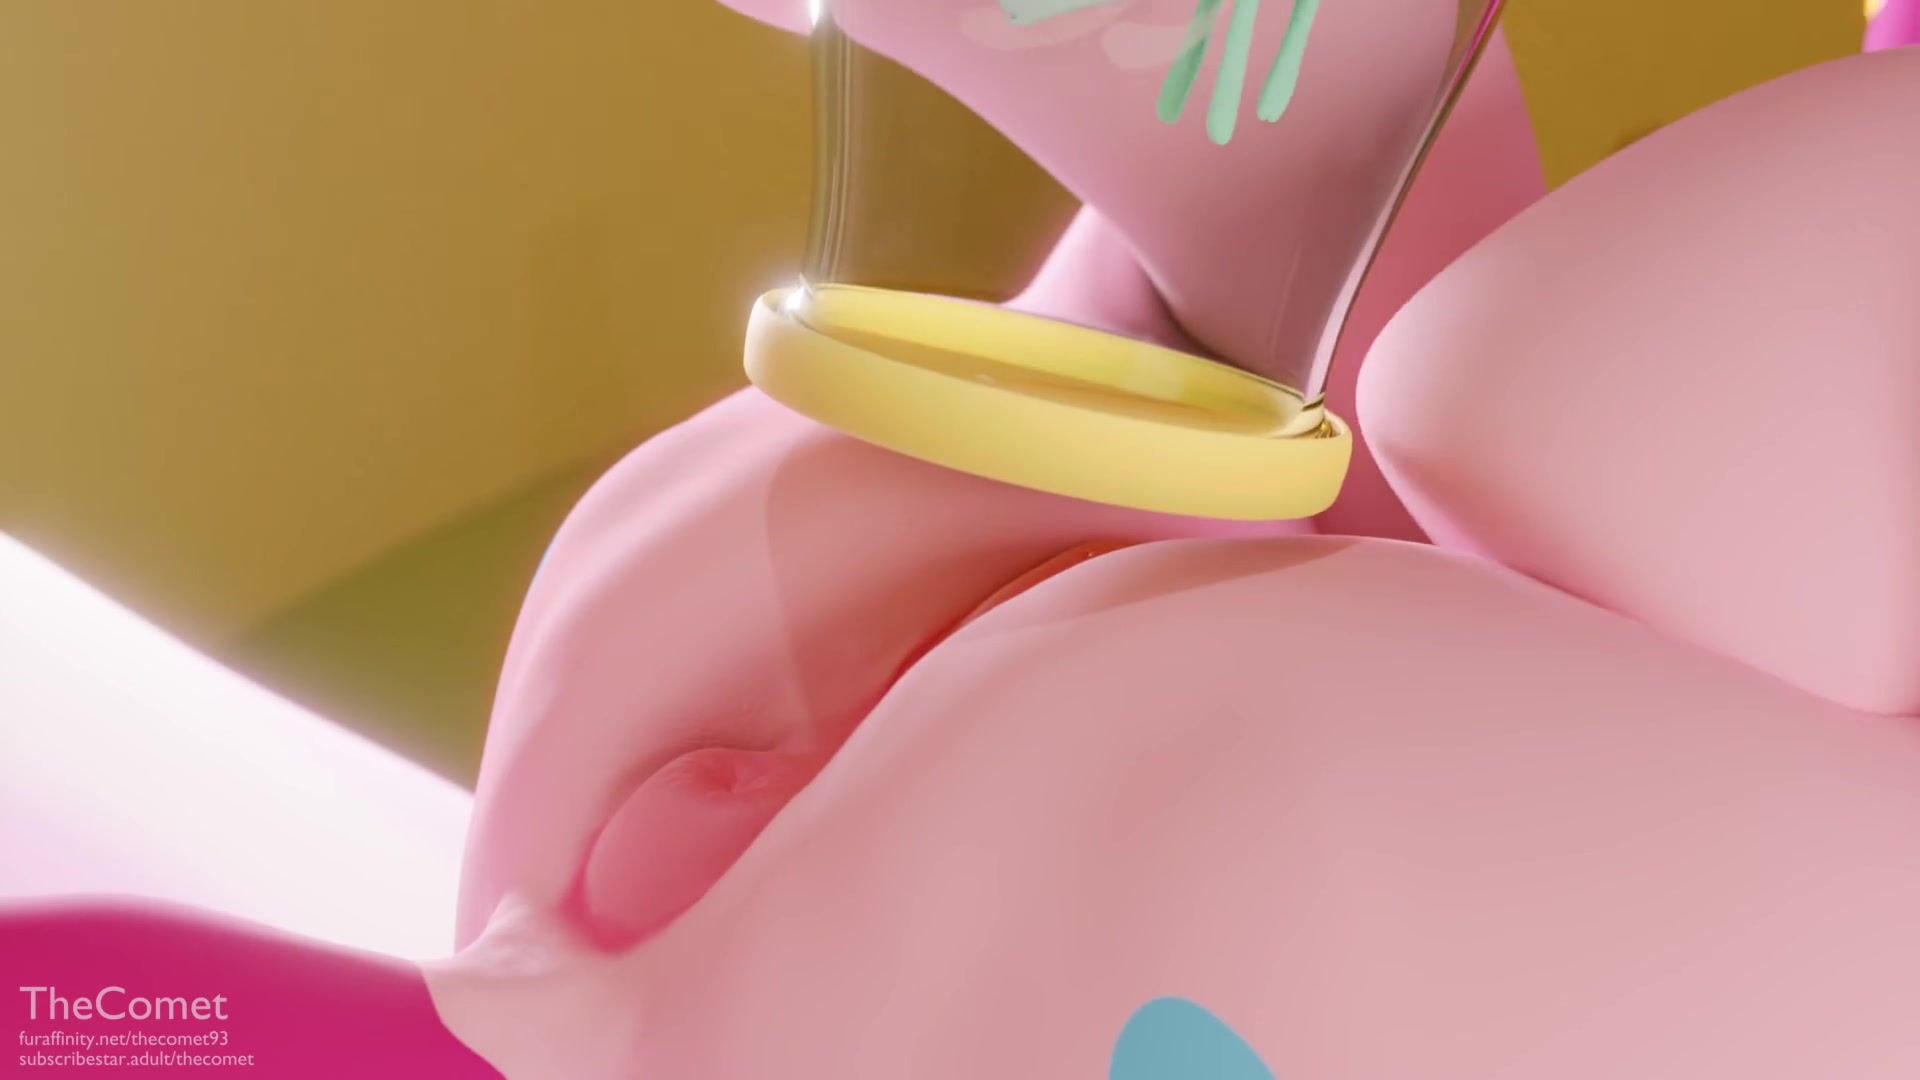 Mlp Anal Vore Porn - Pinkie Pie farts on and anal vores a fairy - ThisVid.com